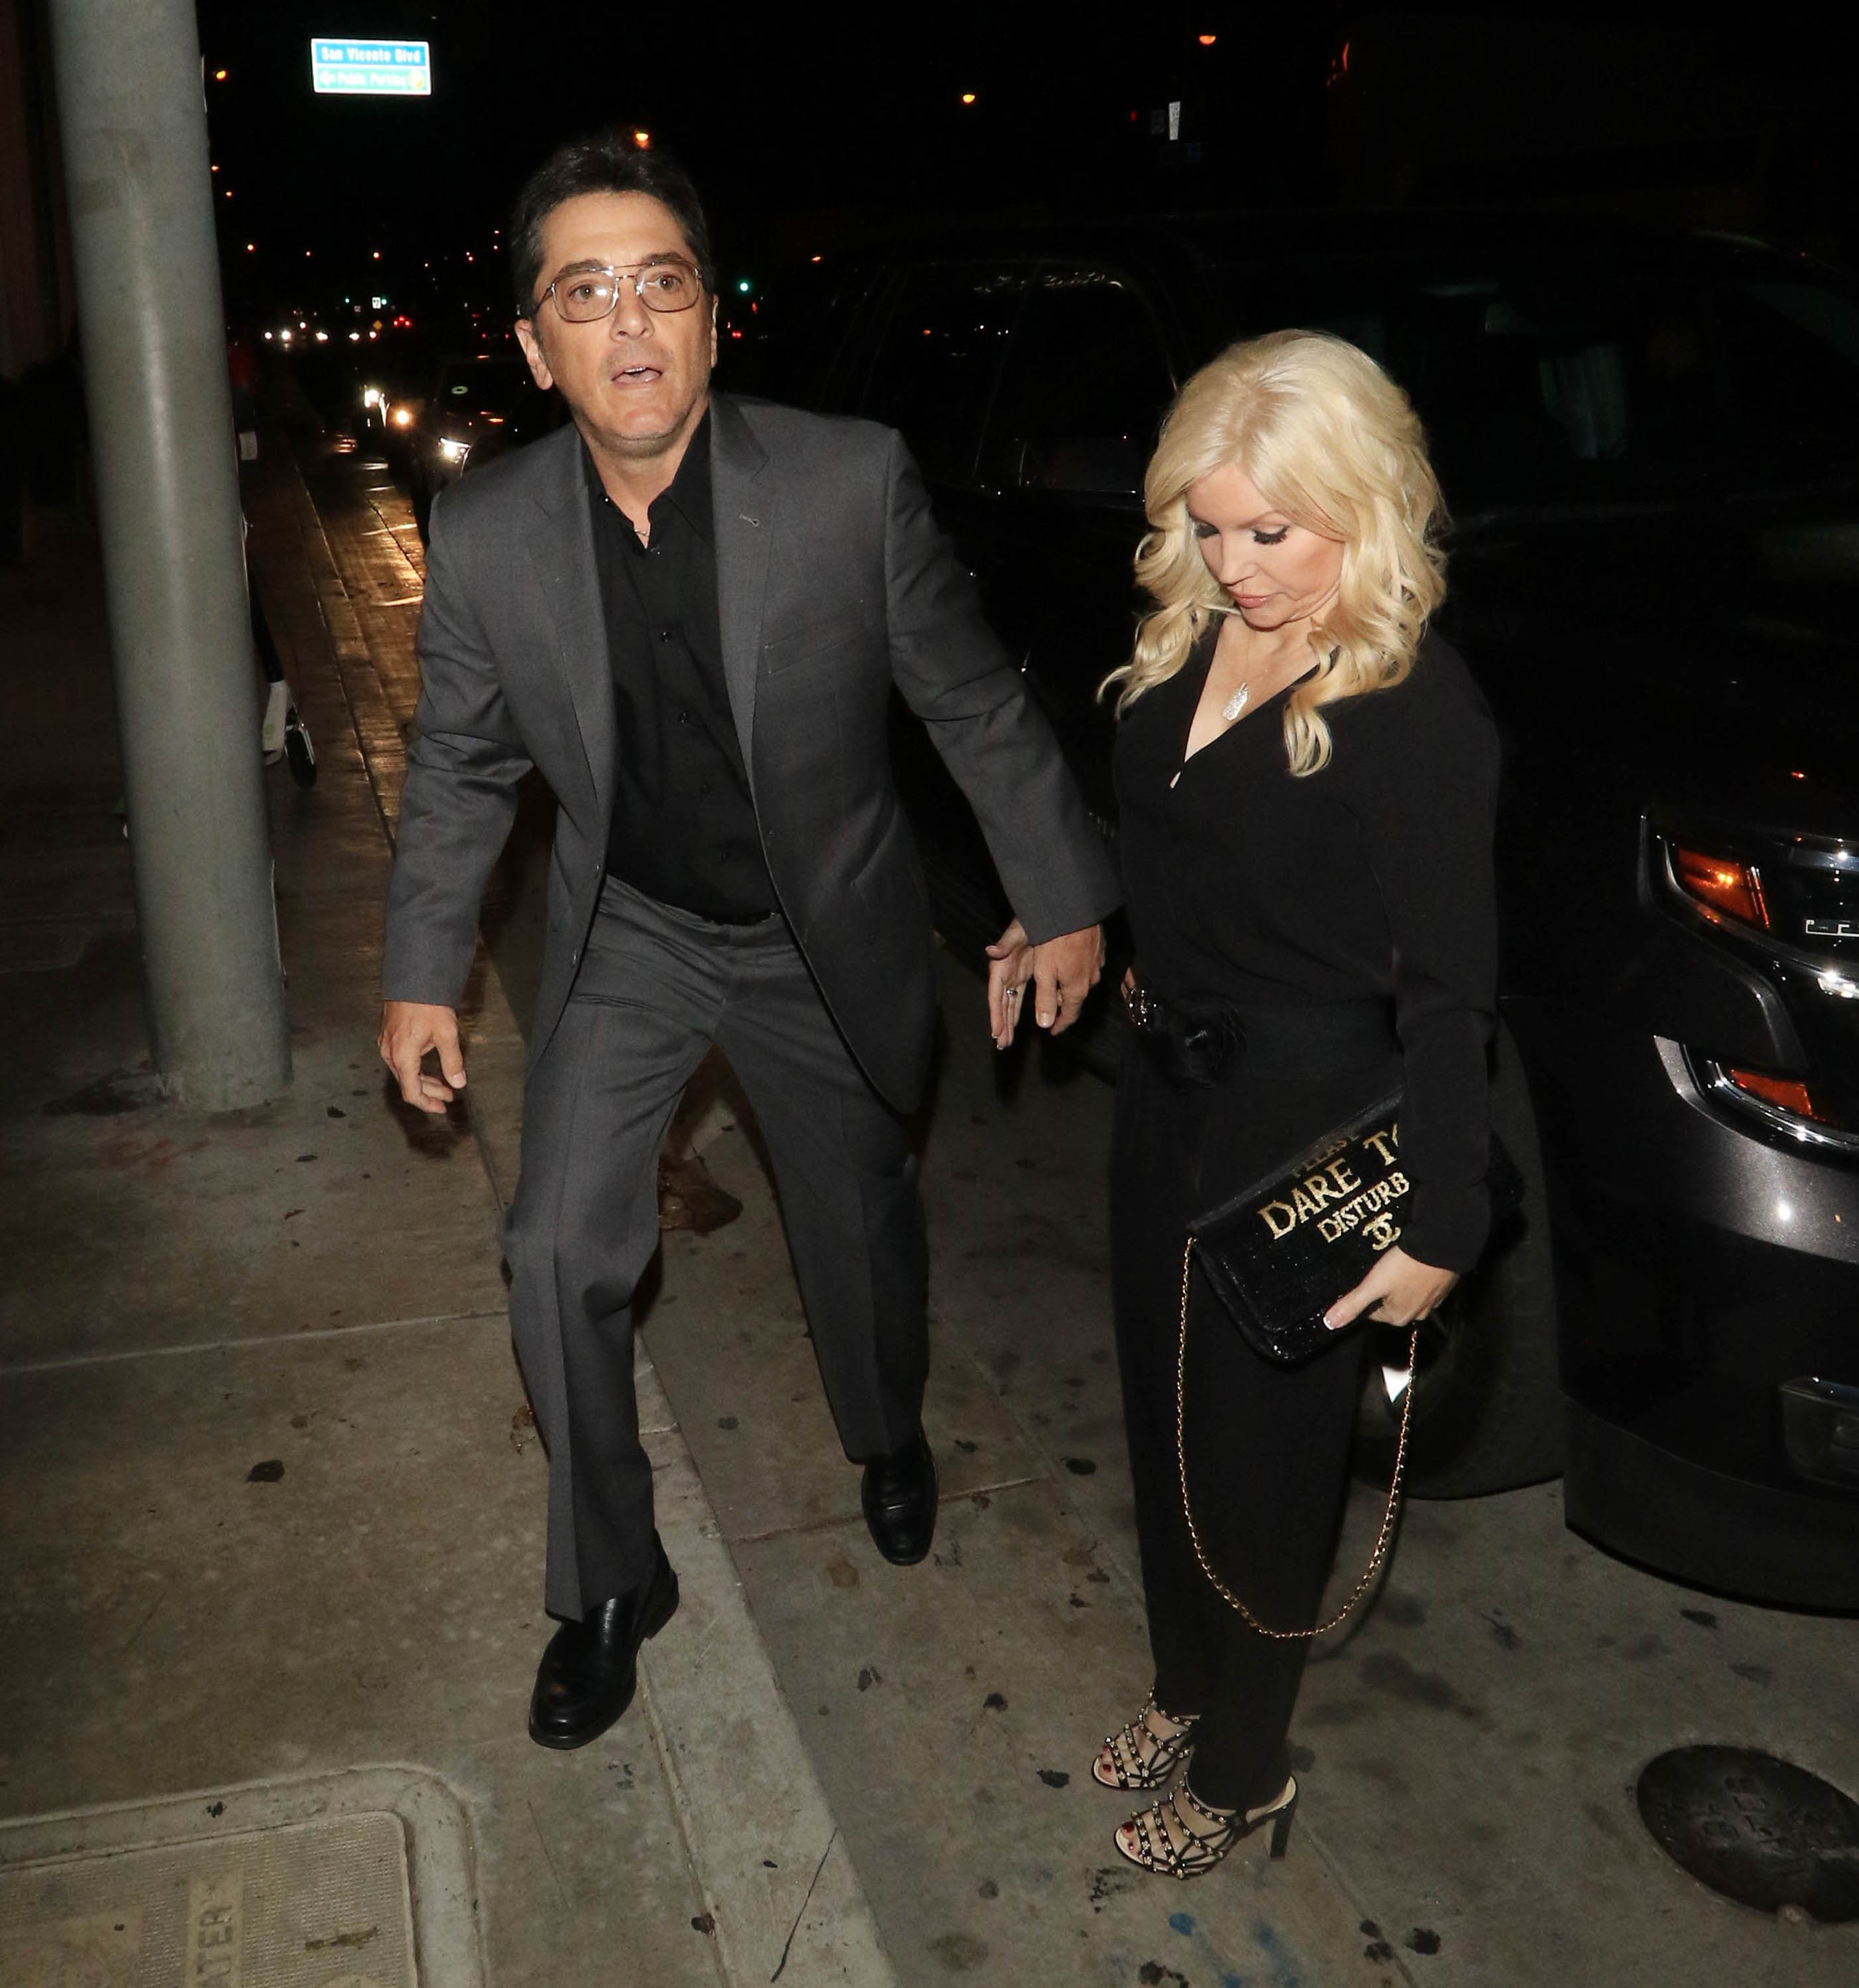 Scott Baio and Renee Sloan spotted on March 30, 2018 in Los Angeles, California. / Source: Getty Images